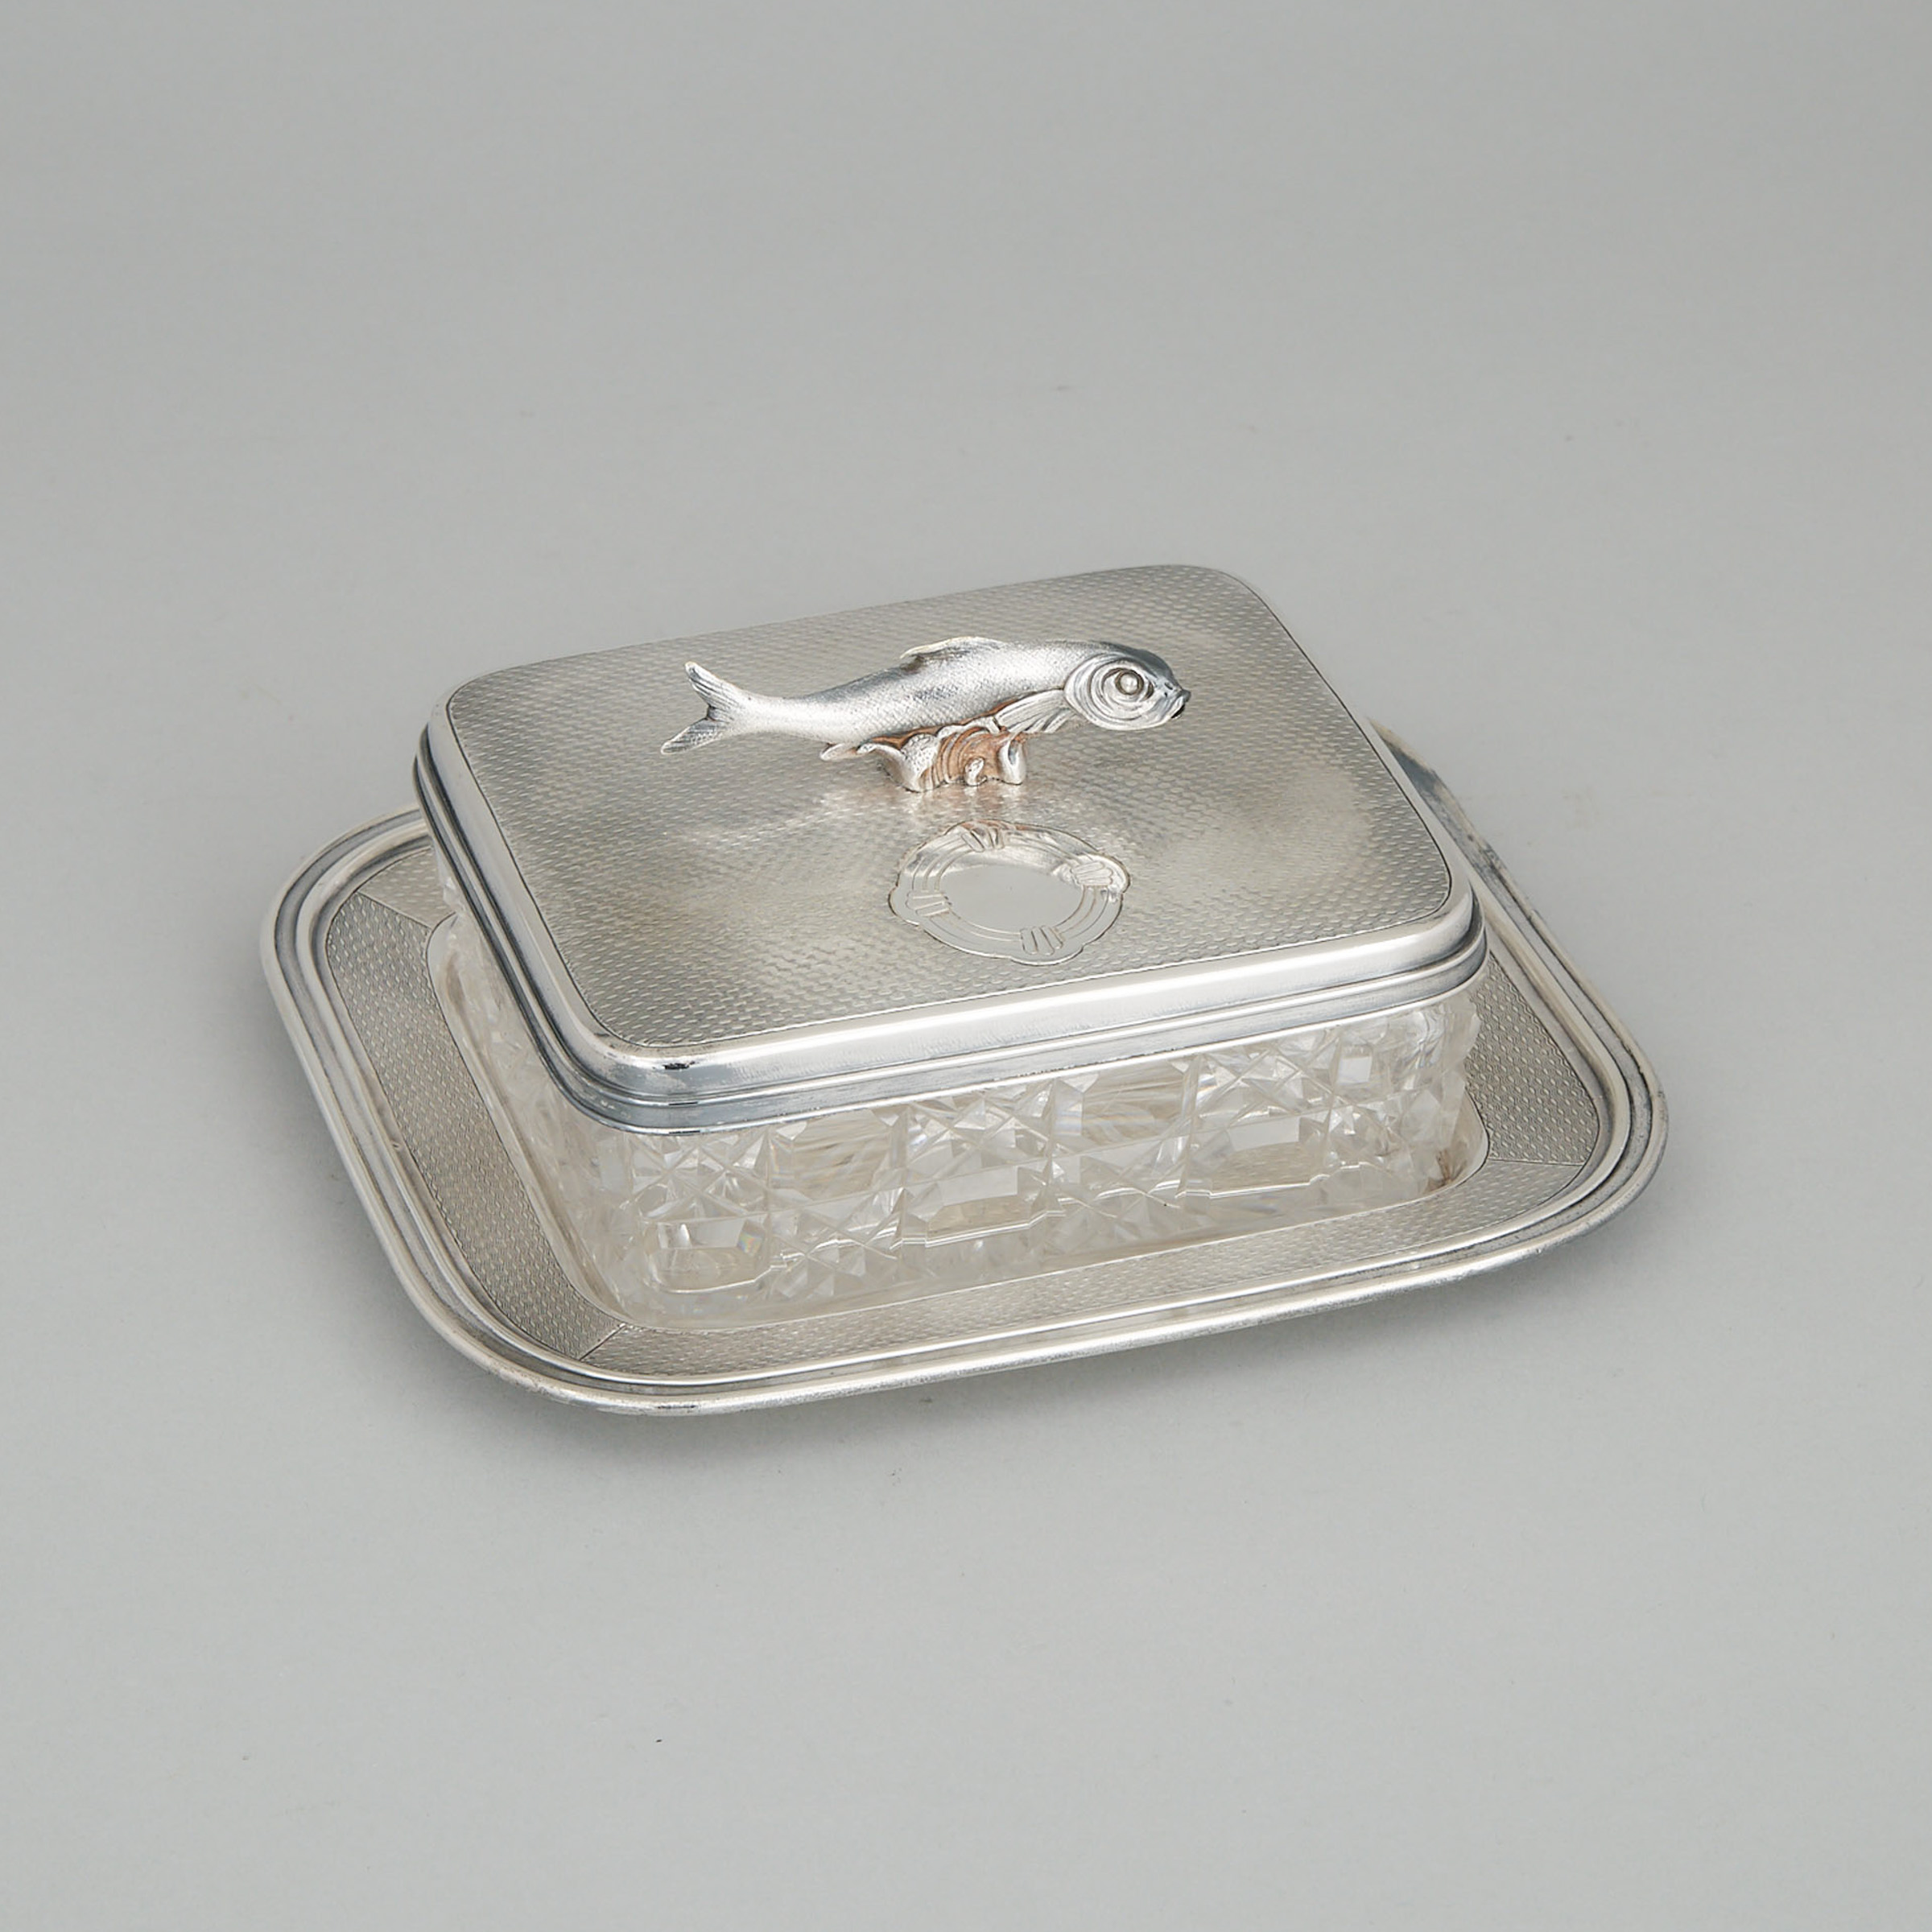 French Silver Plated and Cut Glass Sardine Dish on Stand, Christofle, 20th century